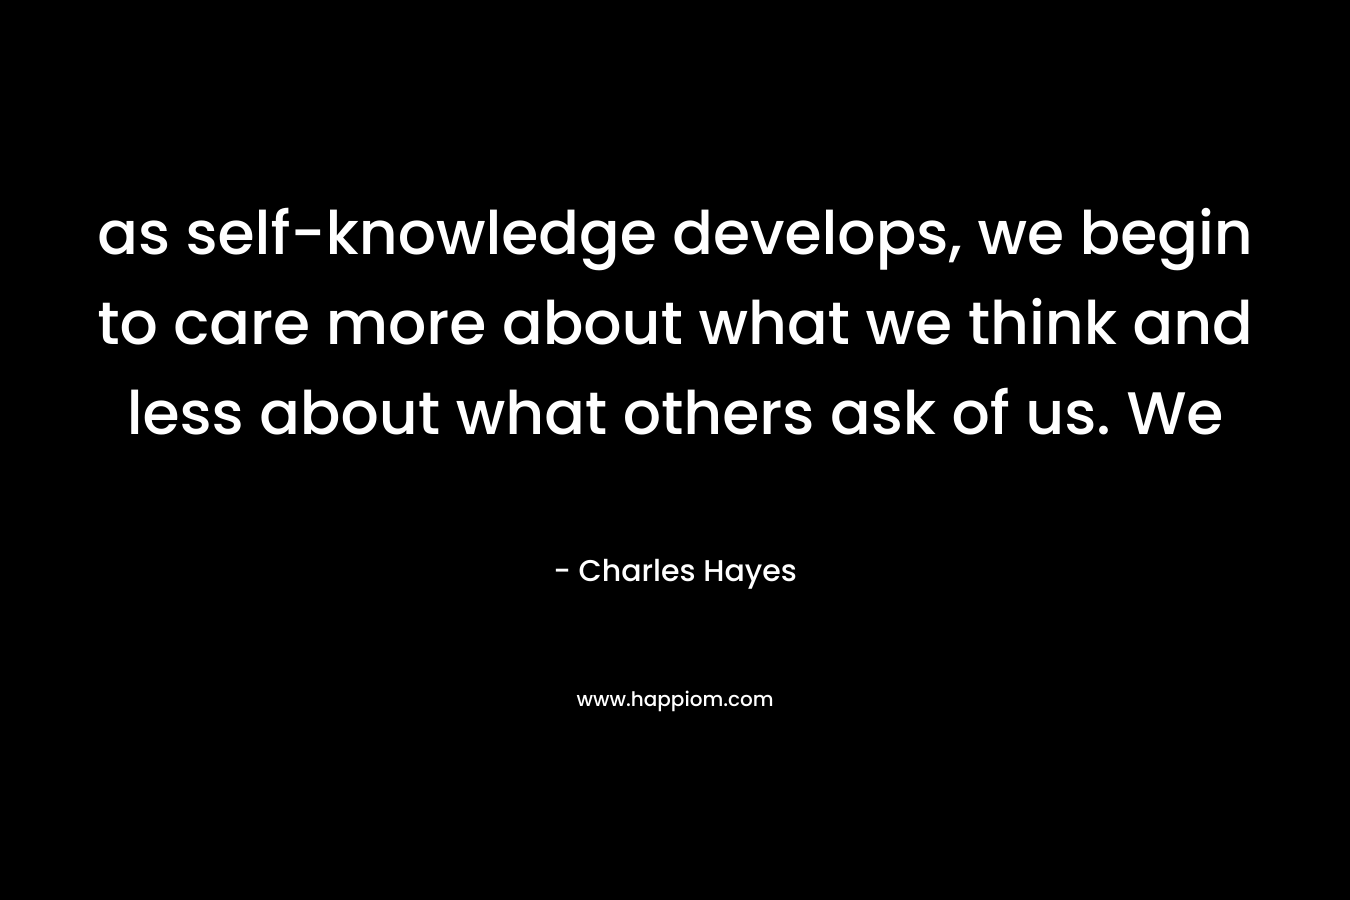 as self-knowledge develops, we begin to care more about what we think and less about what others ask of us. We – Charles Hayes